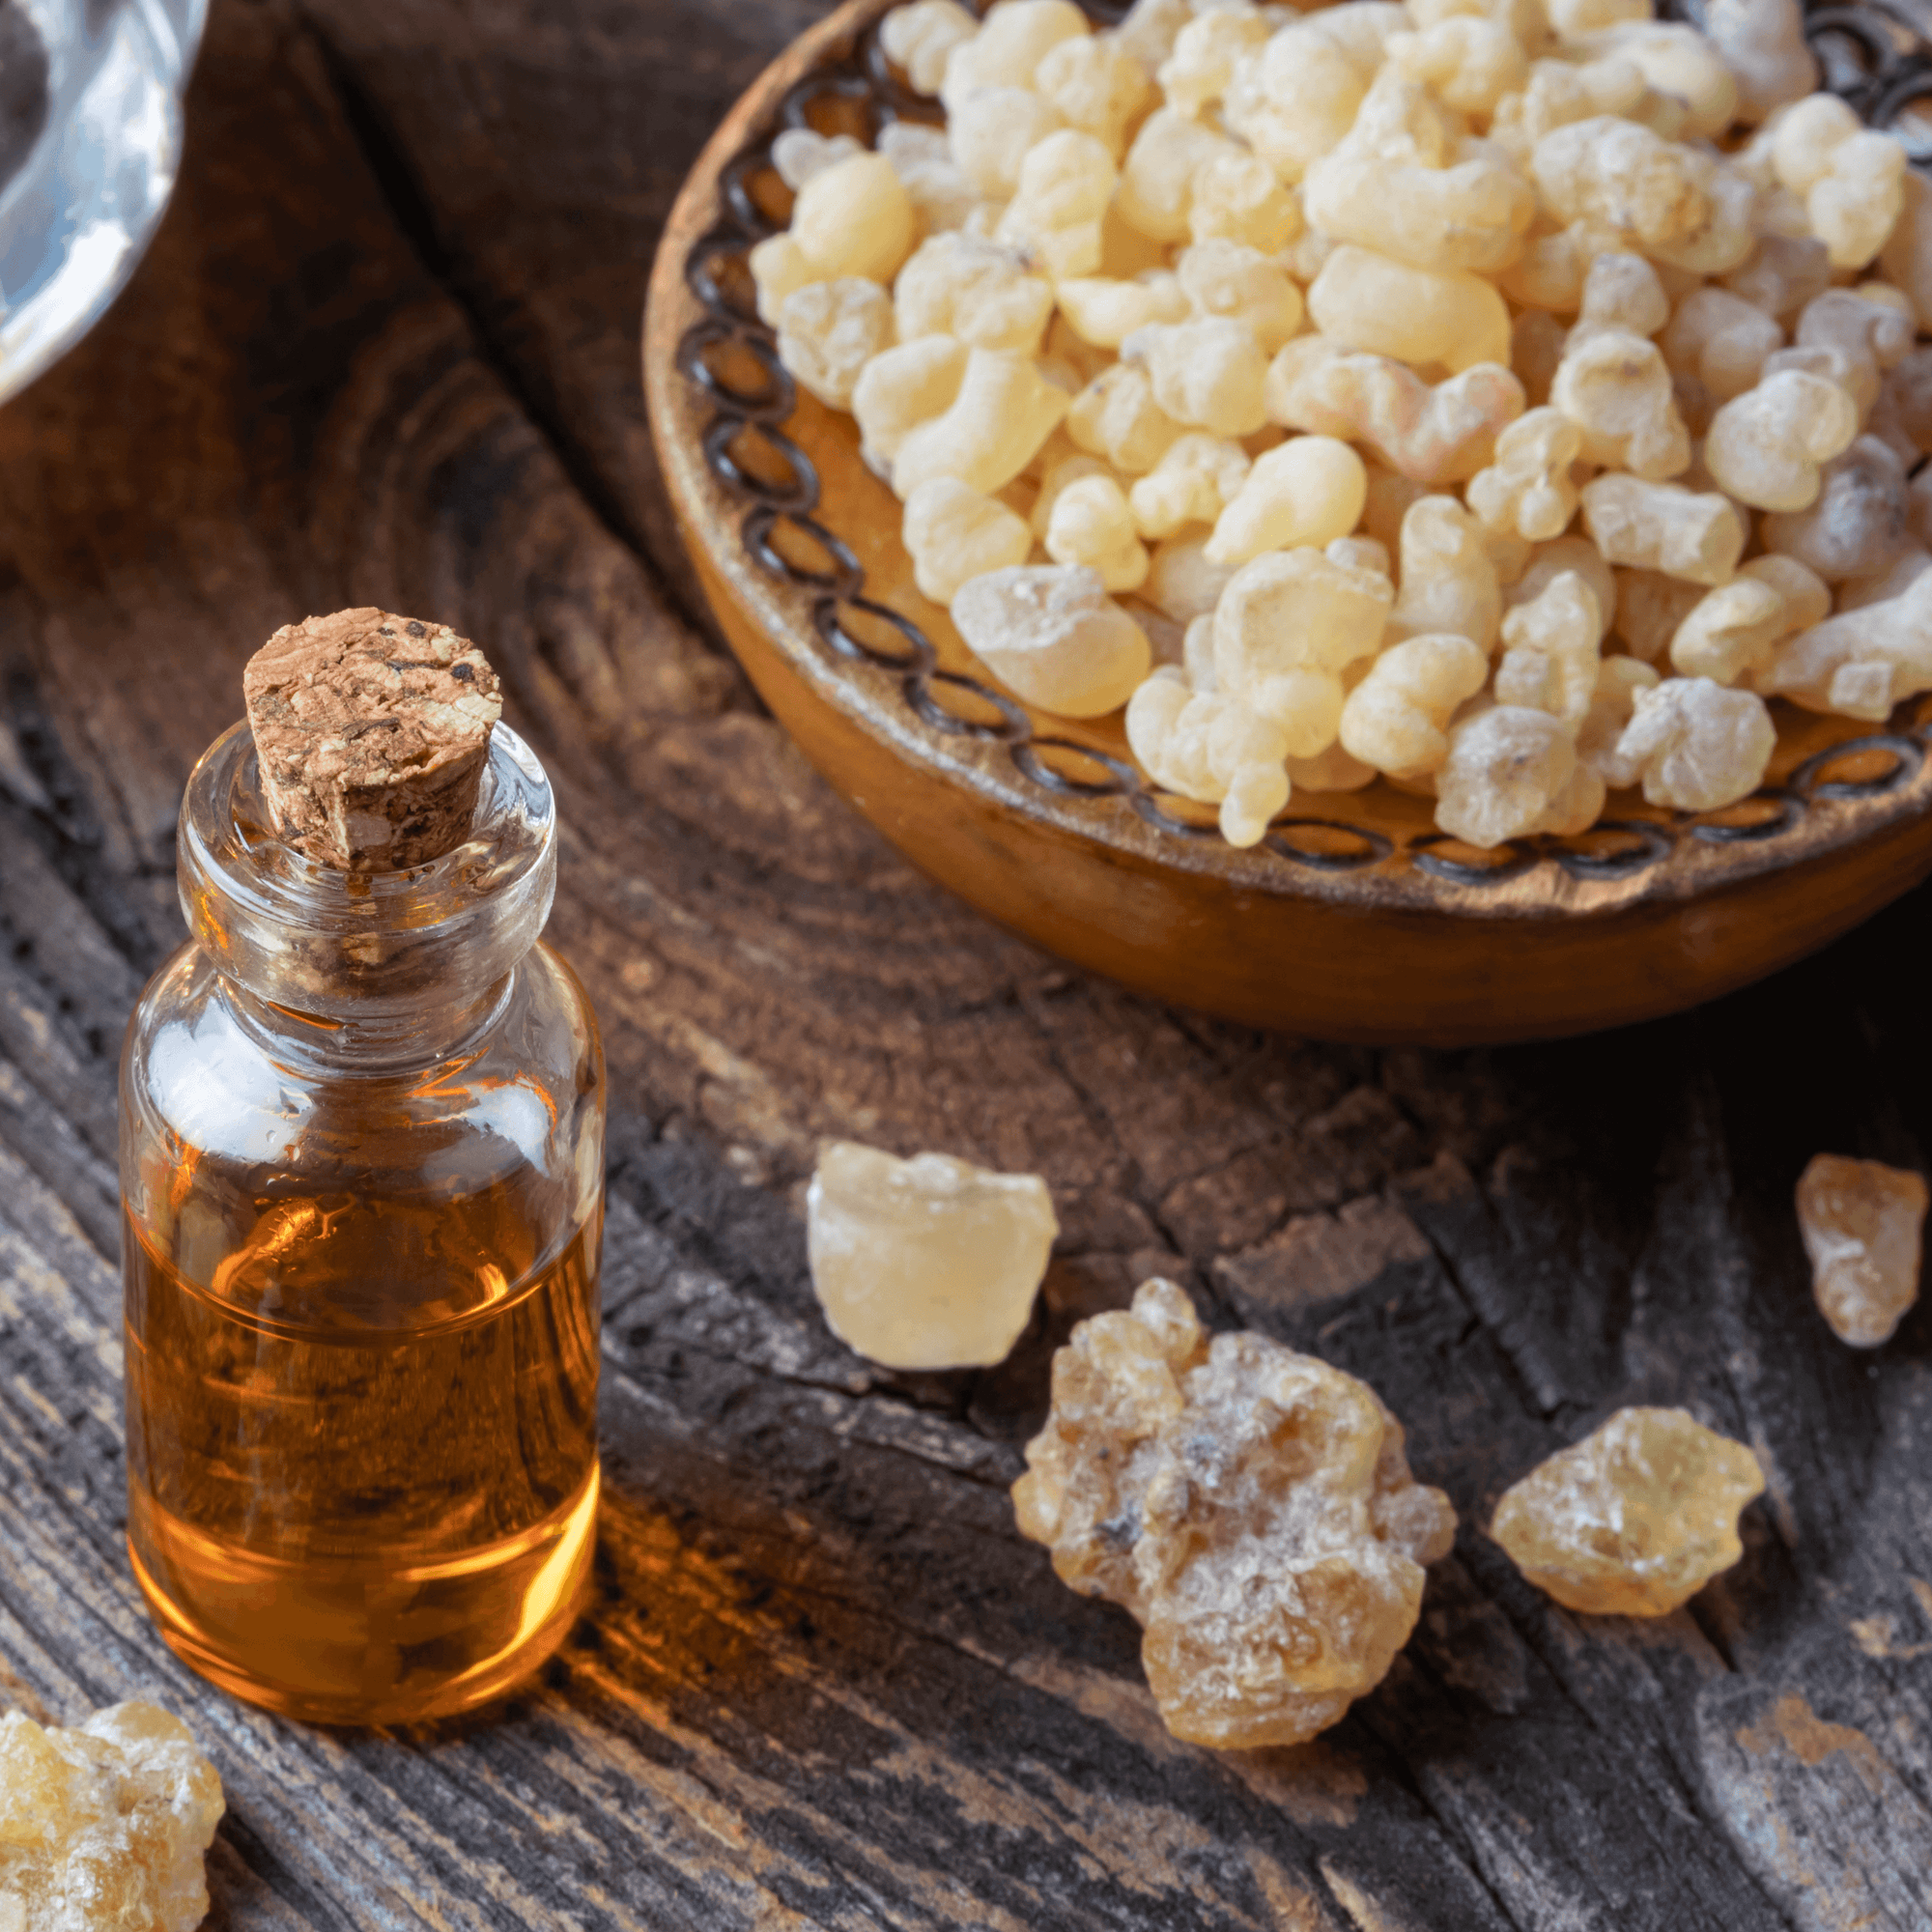 Be Bohemian Botanical Sea Serum Frankincense Essential Oil. Hard pieces of frankincense sit in a clay bowl with a couple of chunks spilled over and landing next to a corked clear bottle of frankincense oil sitting on top of an old oak table.